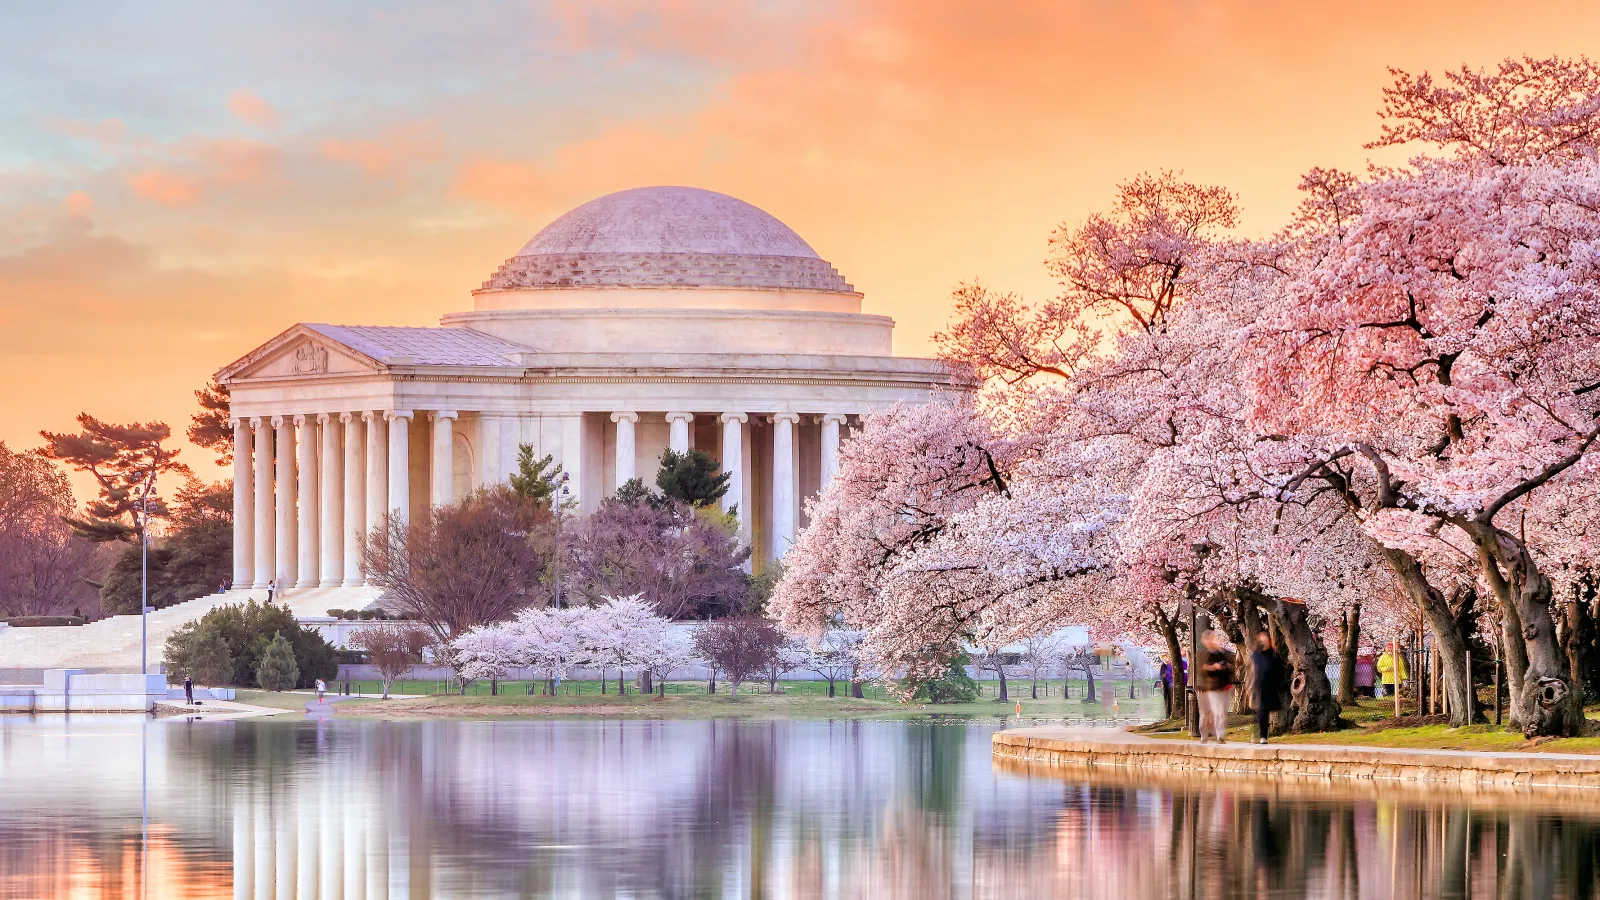 Jefferson Memorial with a dome and pink blossoms in front of it